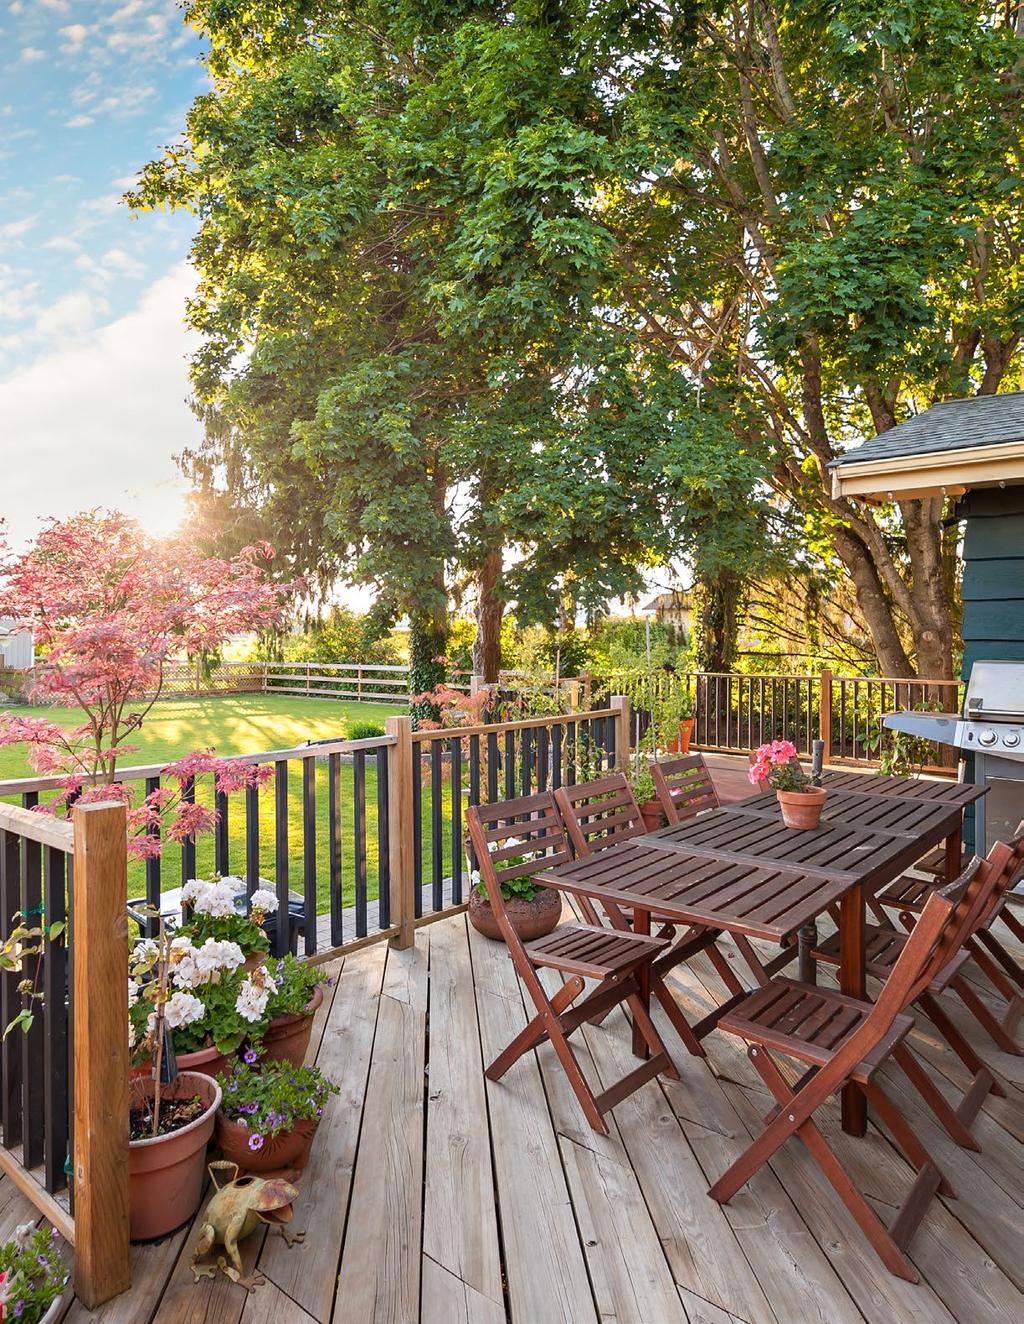 An elite country living experience at the Richmond Stables Estate in Gilmore, Richmond,